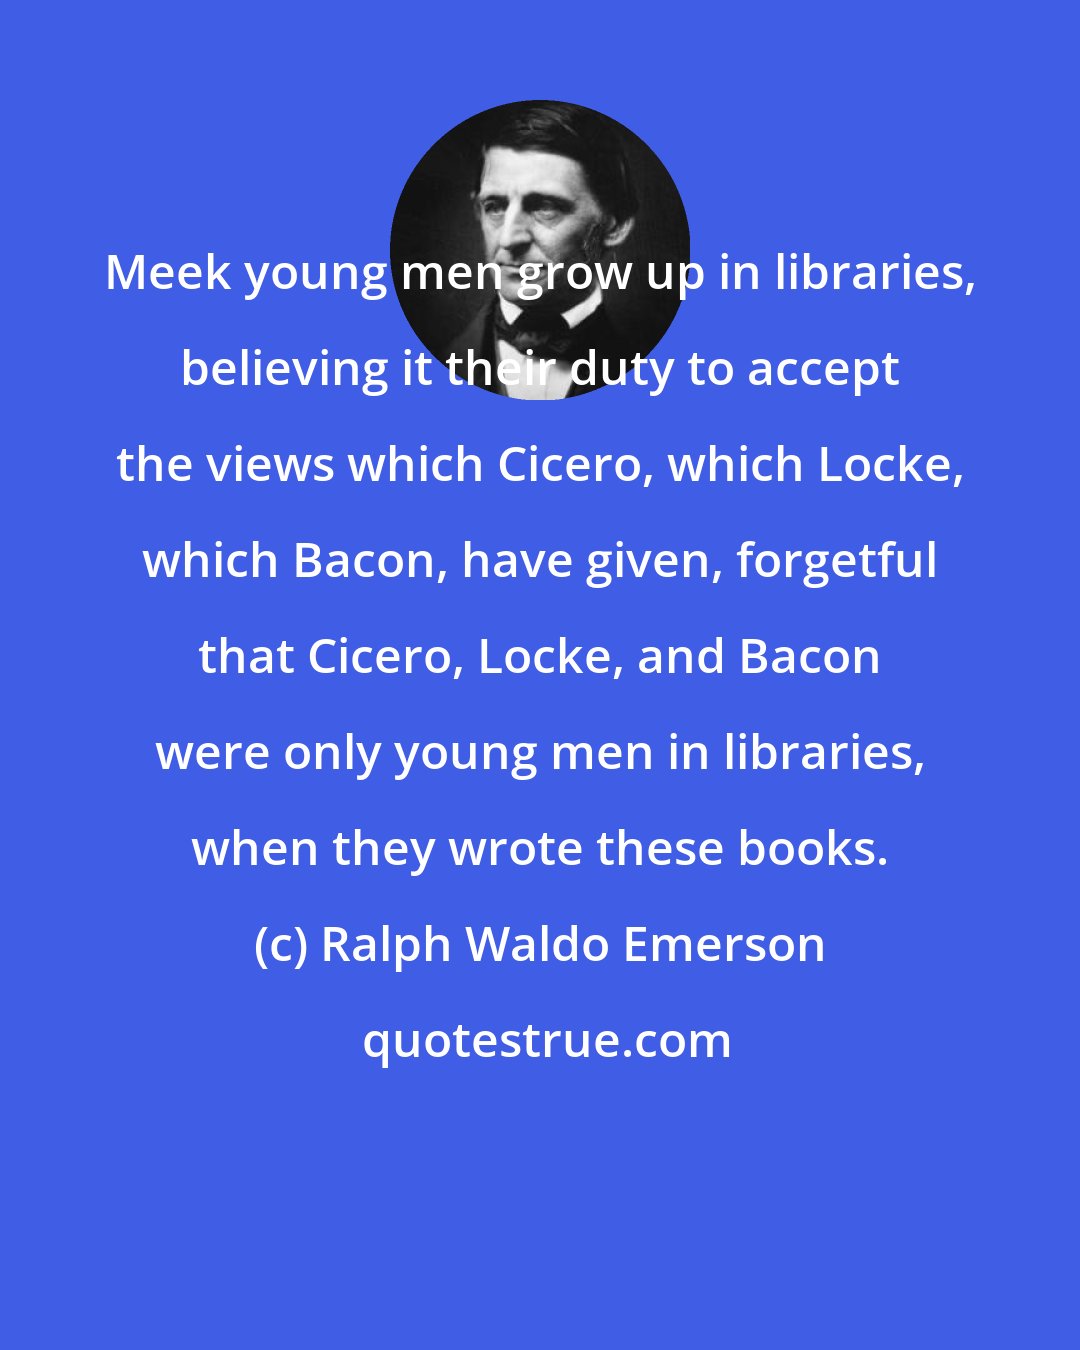 Ralph Waldo Emerson: Meek young men grow up in libraries, believing it their duty to accept the views which Cicero, which Locke, which Bacon, have given, forgetful that Cicero, Locke, and Bacon were only young men in libraries, when they wrote these books.